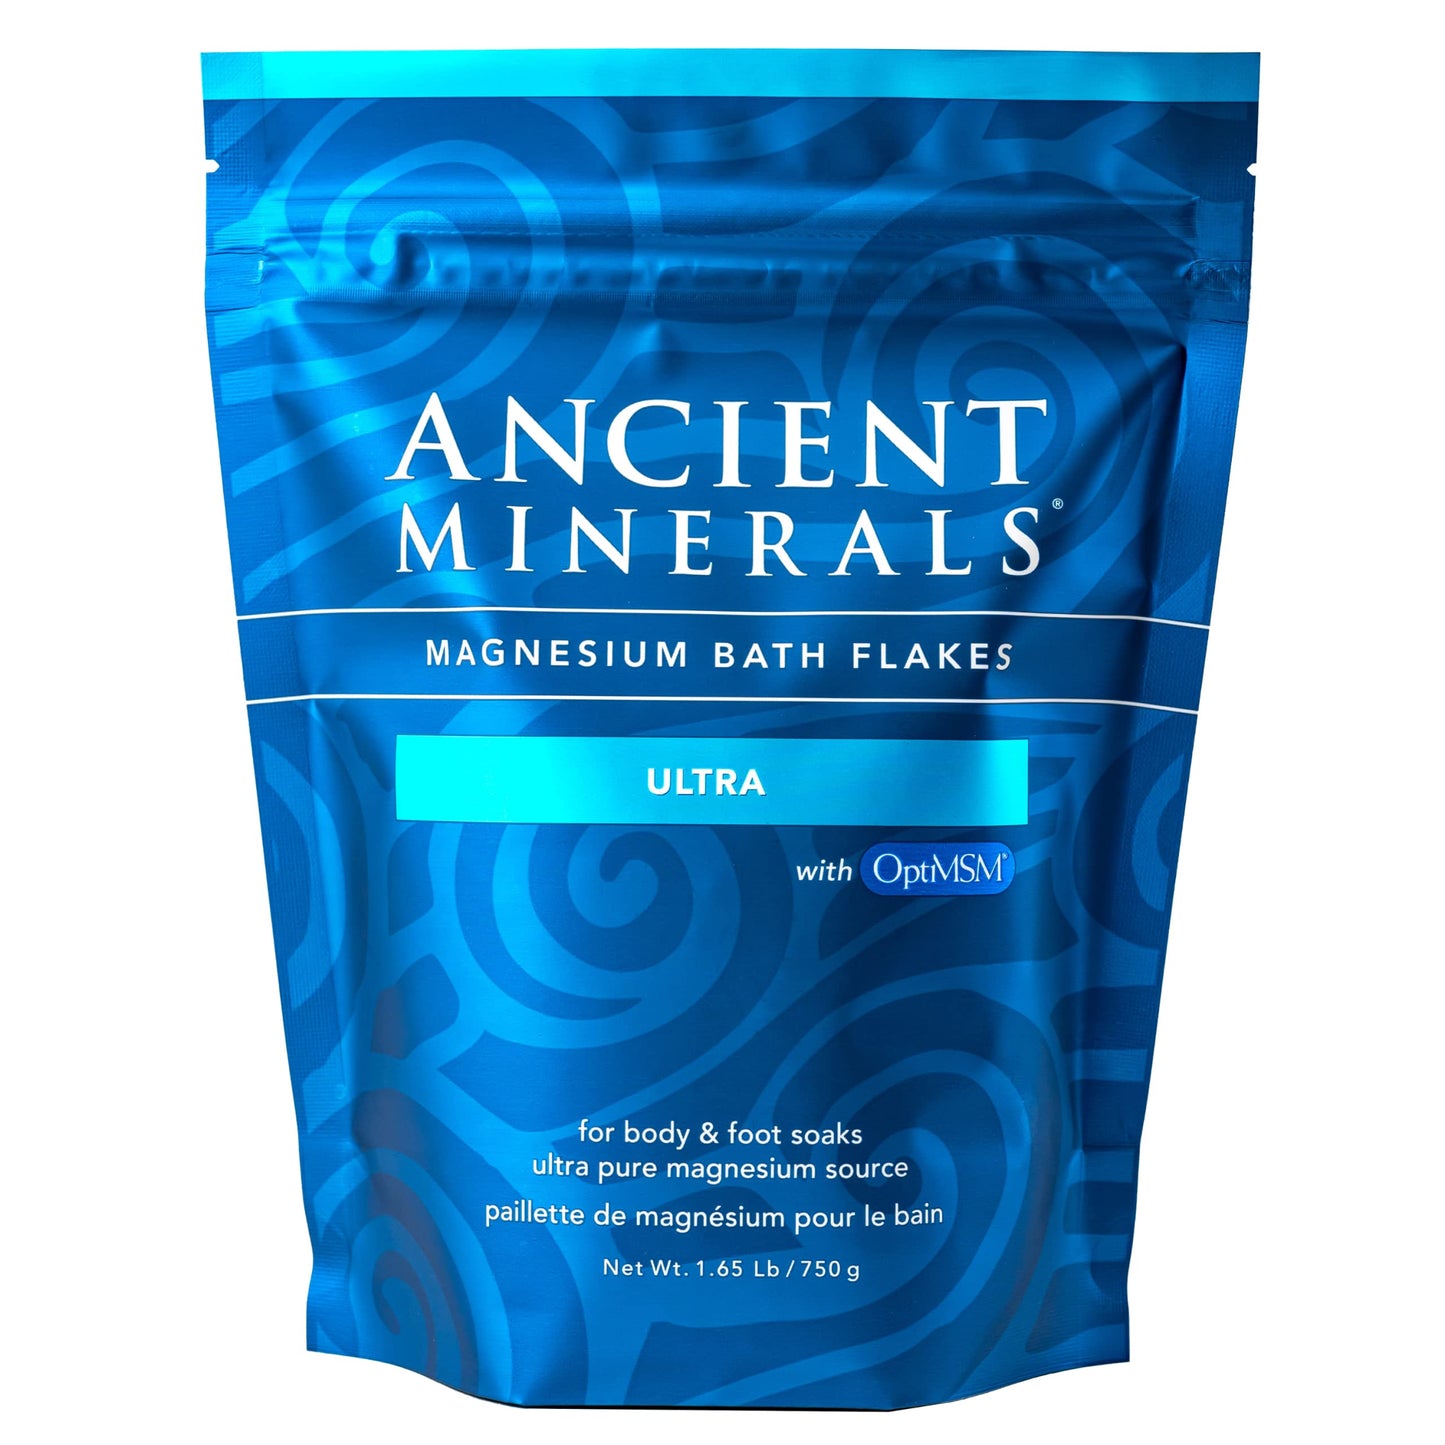 Ancient Minerals Magnesium Bath Flakes Ultra with OptiMSM - Resealable Magnesium Supplement Bag of Zechstein Chloride with Proven Better Absorption Than Epsom Bath Salt (1.65 lb)